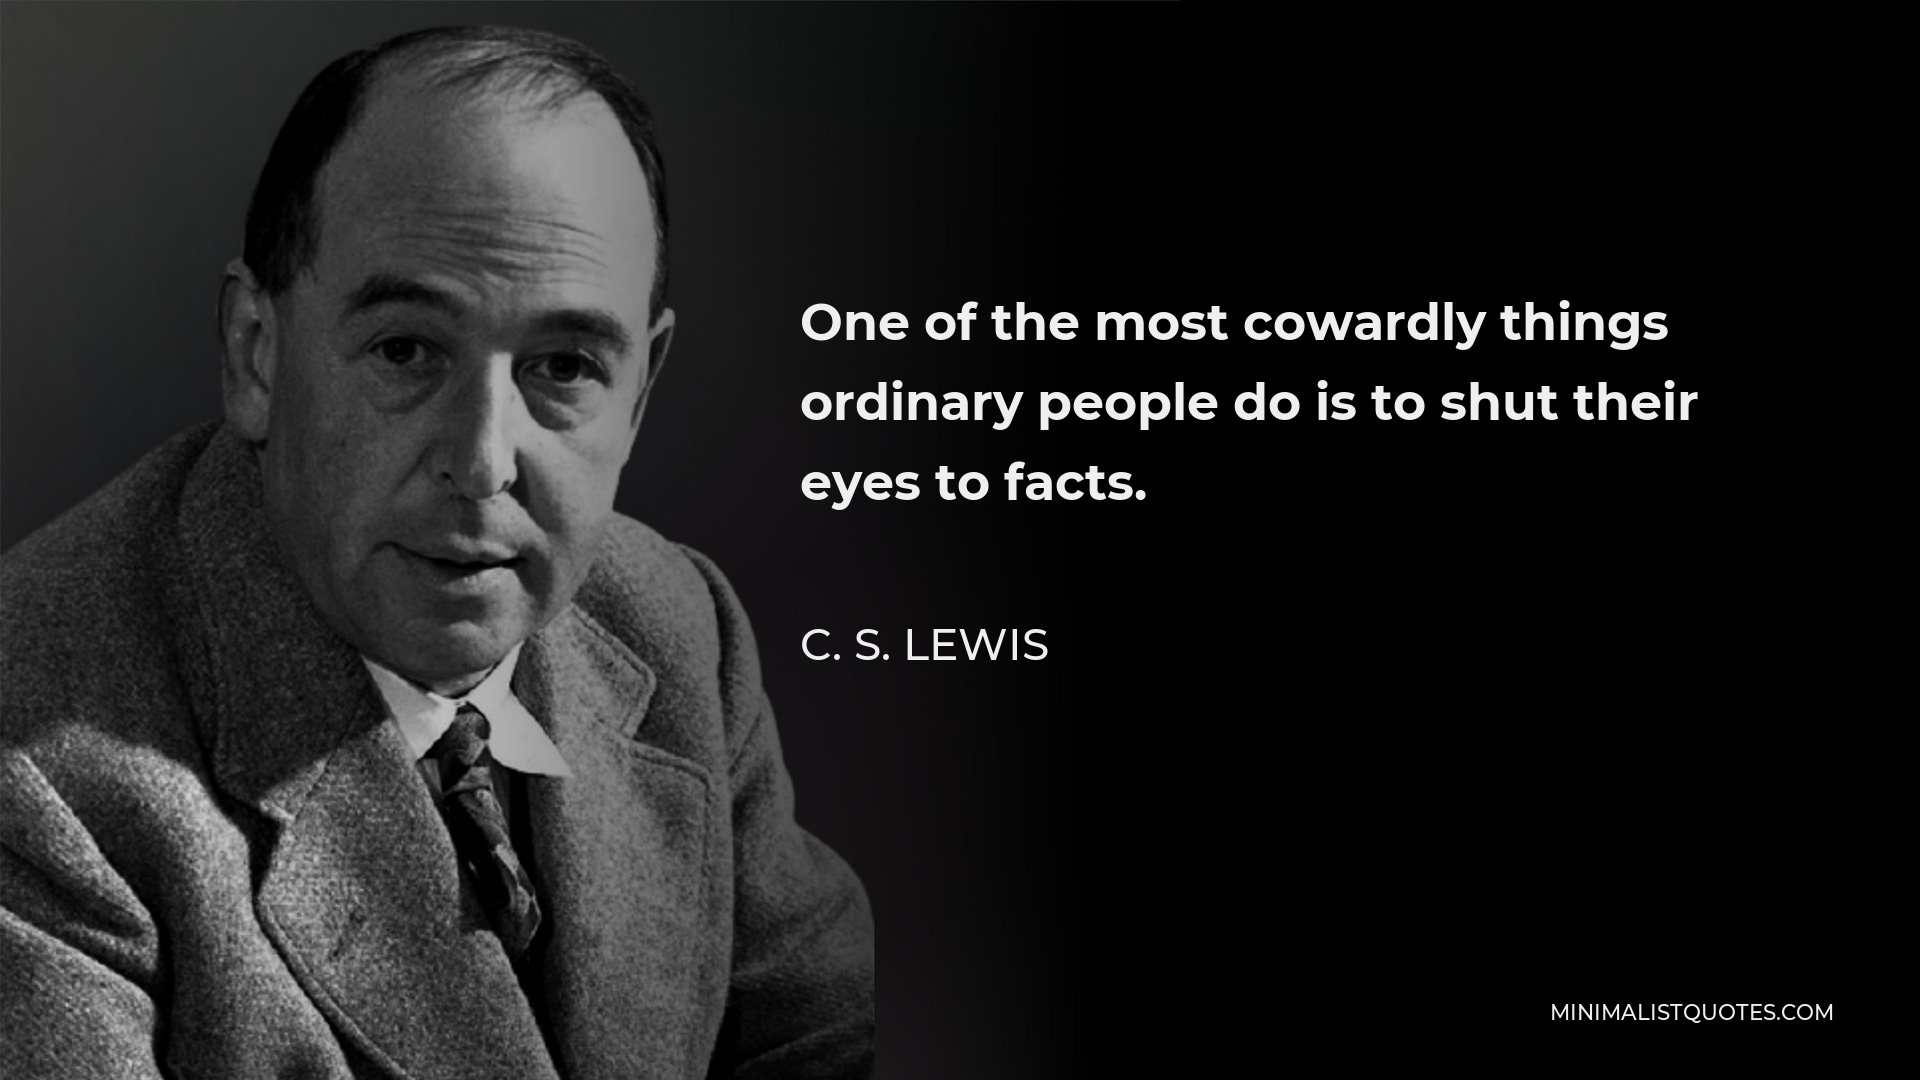 C. S. Lewis Quote - One of the most cowardly things ordinary people do is to shut their eyes to facts.